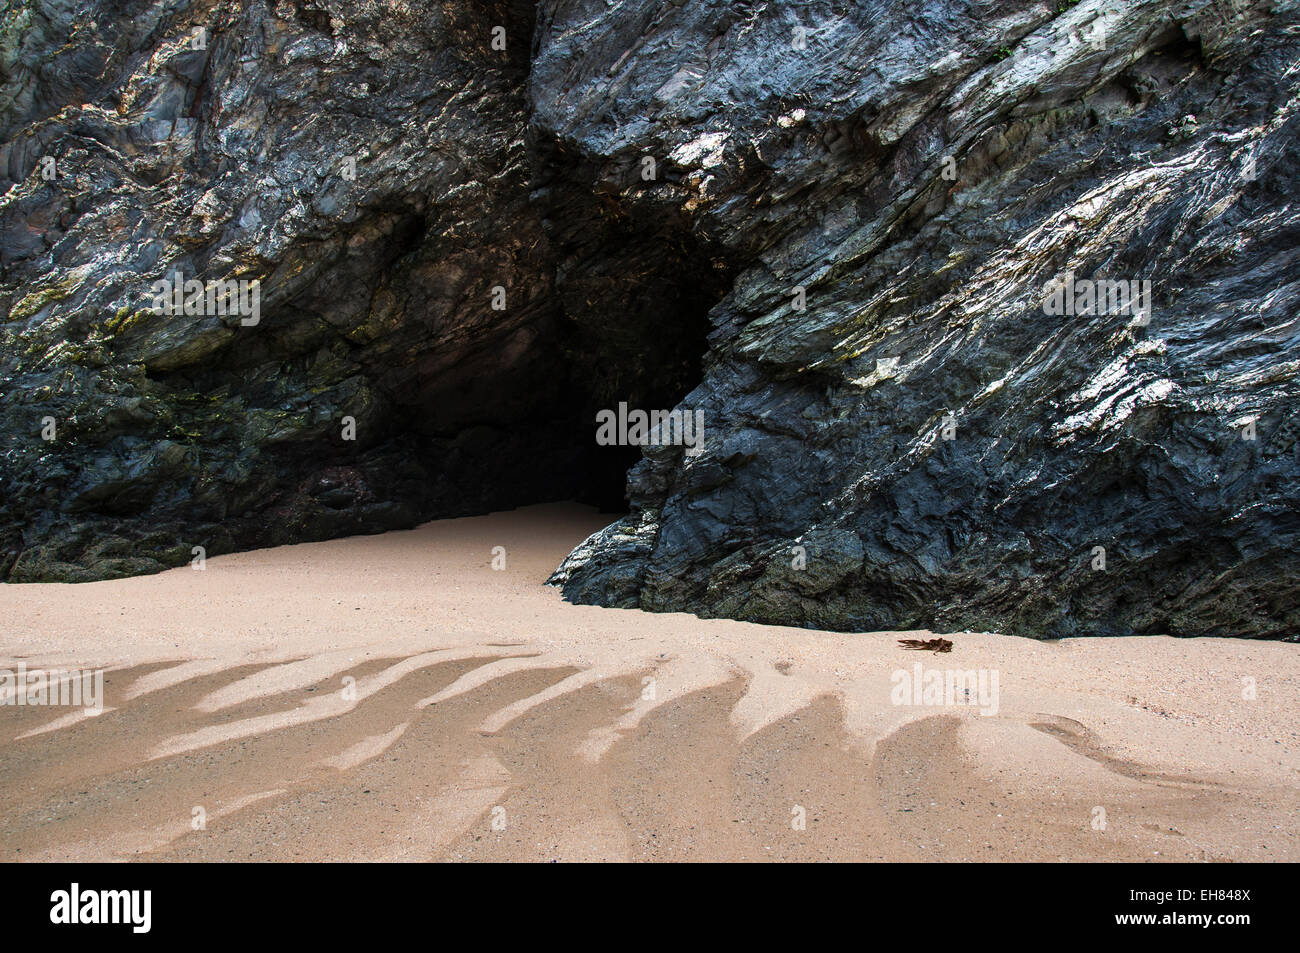 Mysterious cave in the cliffs at Crantock beach near Newquay in Cornwall, England. Stock Photo